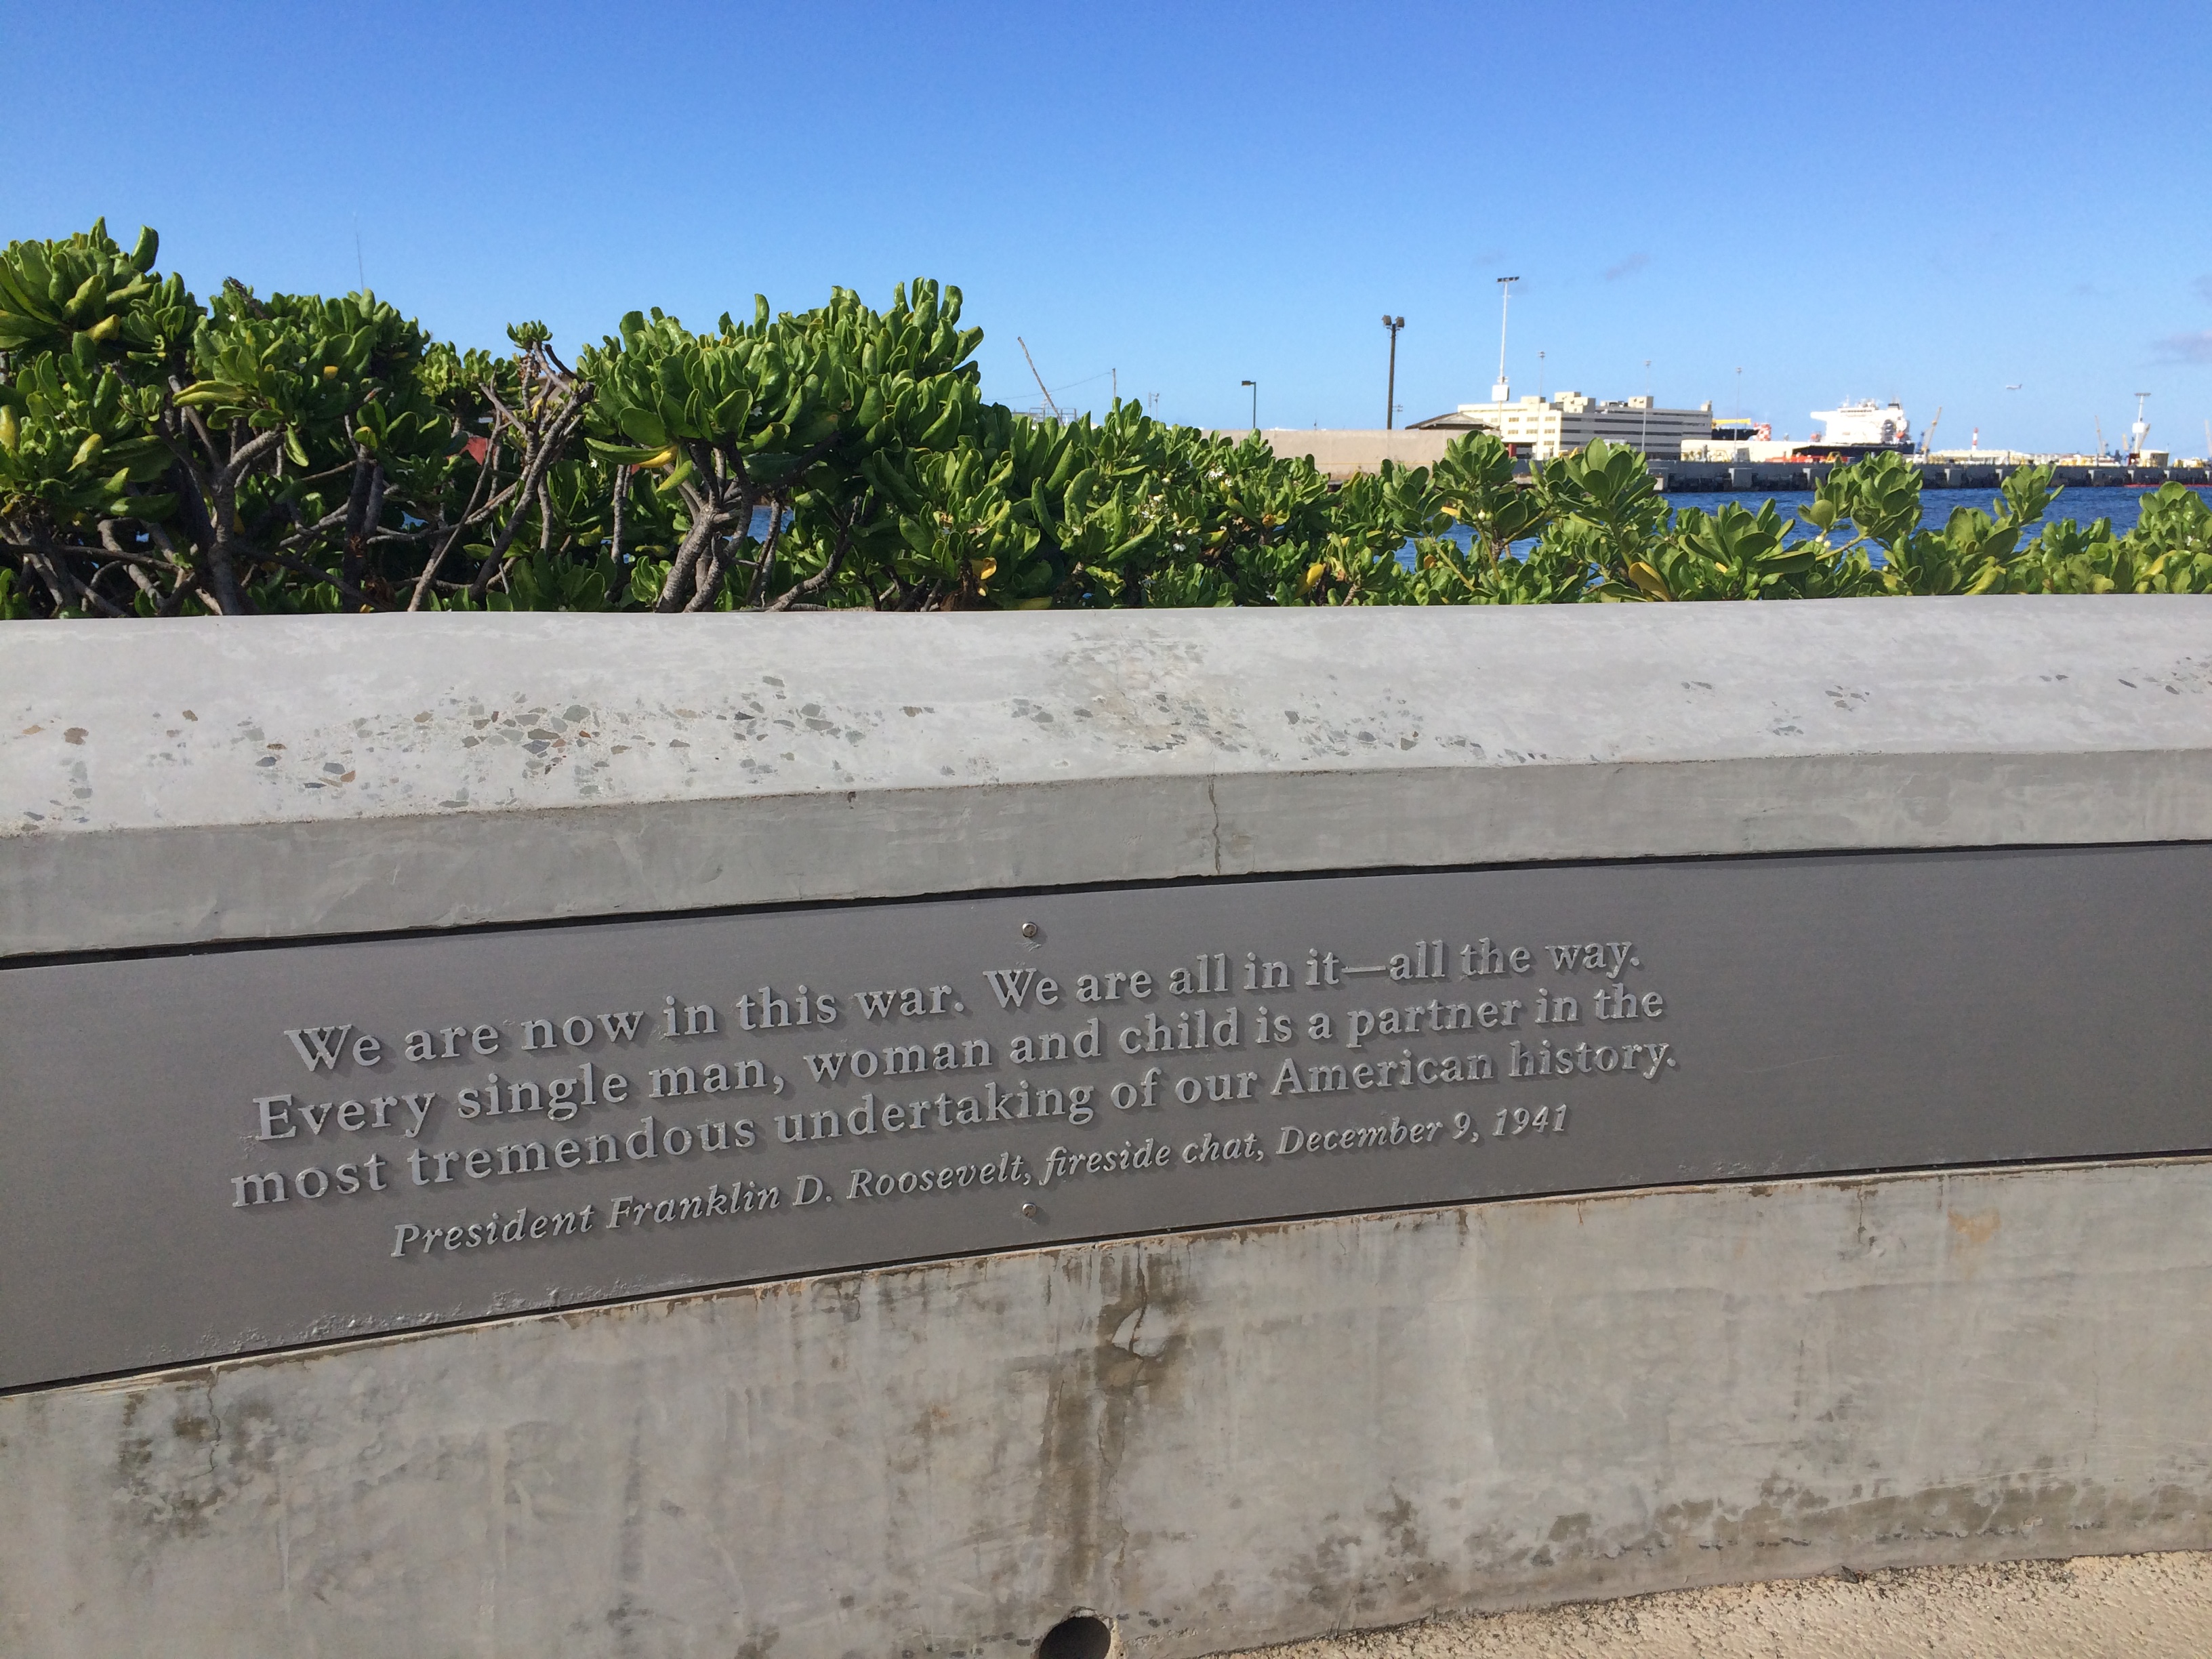 Quote by FDR at Pearl Harbor Memorial